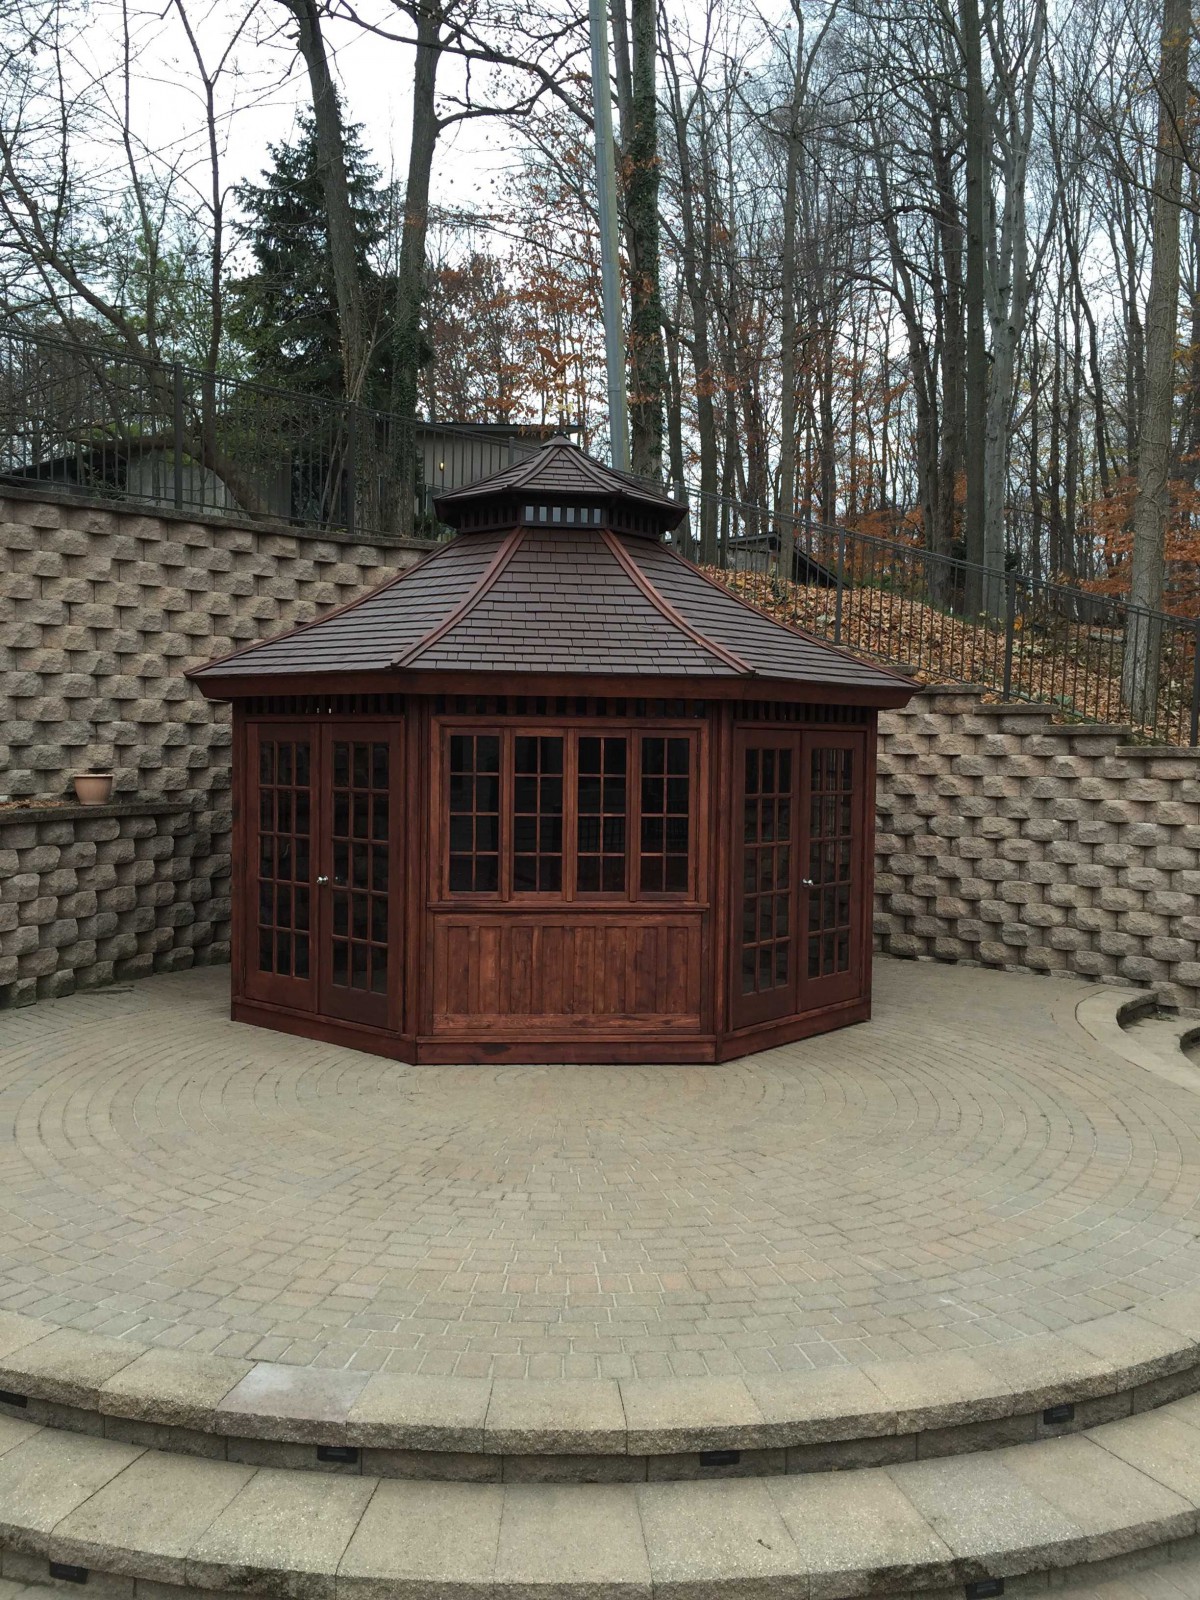 San cristobal gazebo design 16' before woods with weathervanes seen from front.ID number 3133-2.